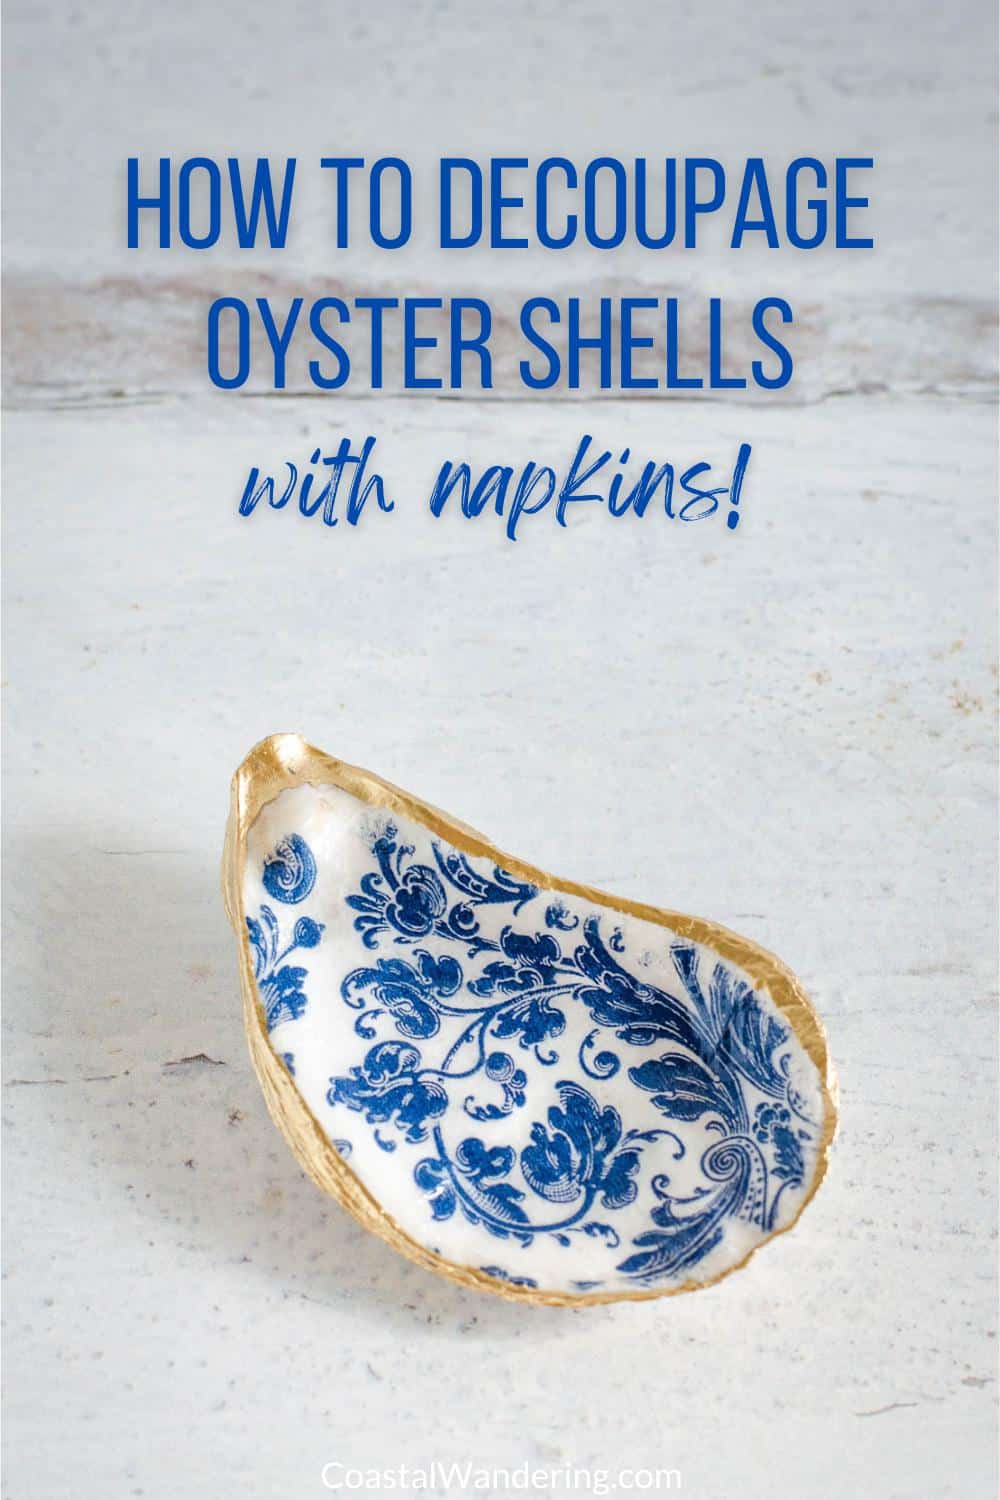 How to decoupage oyster shells with napkins!